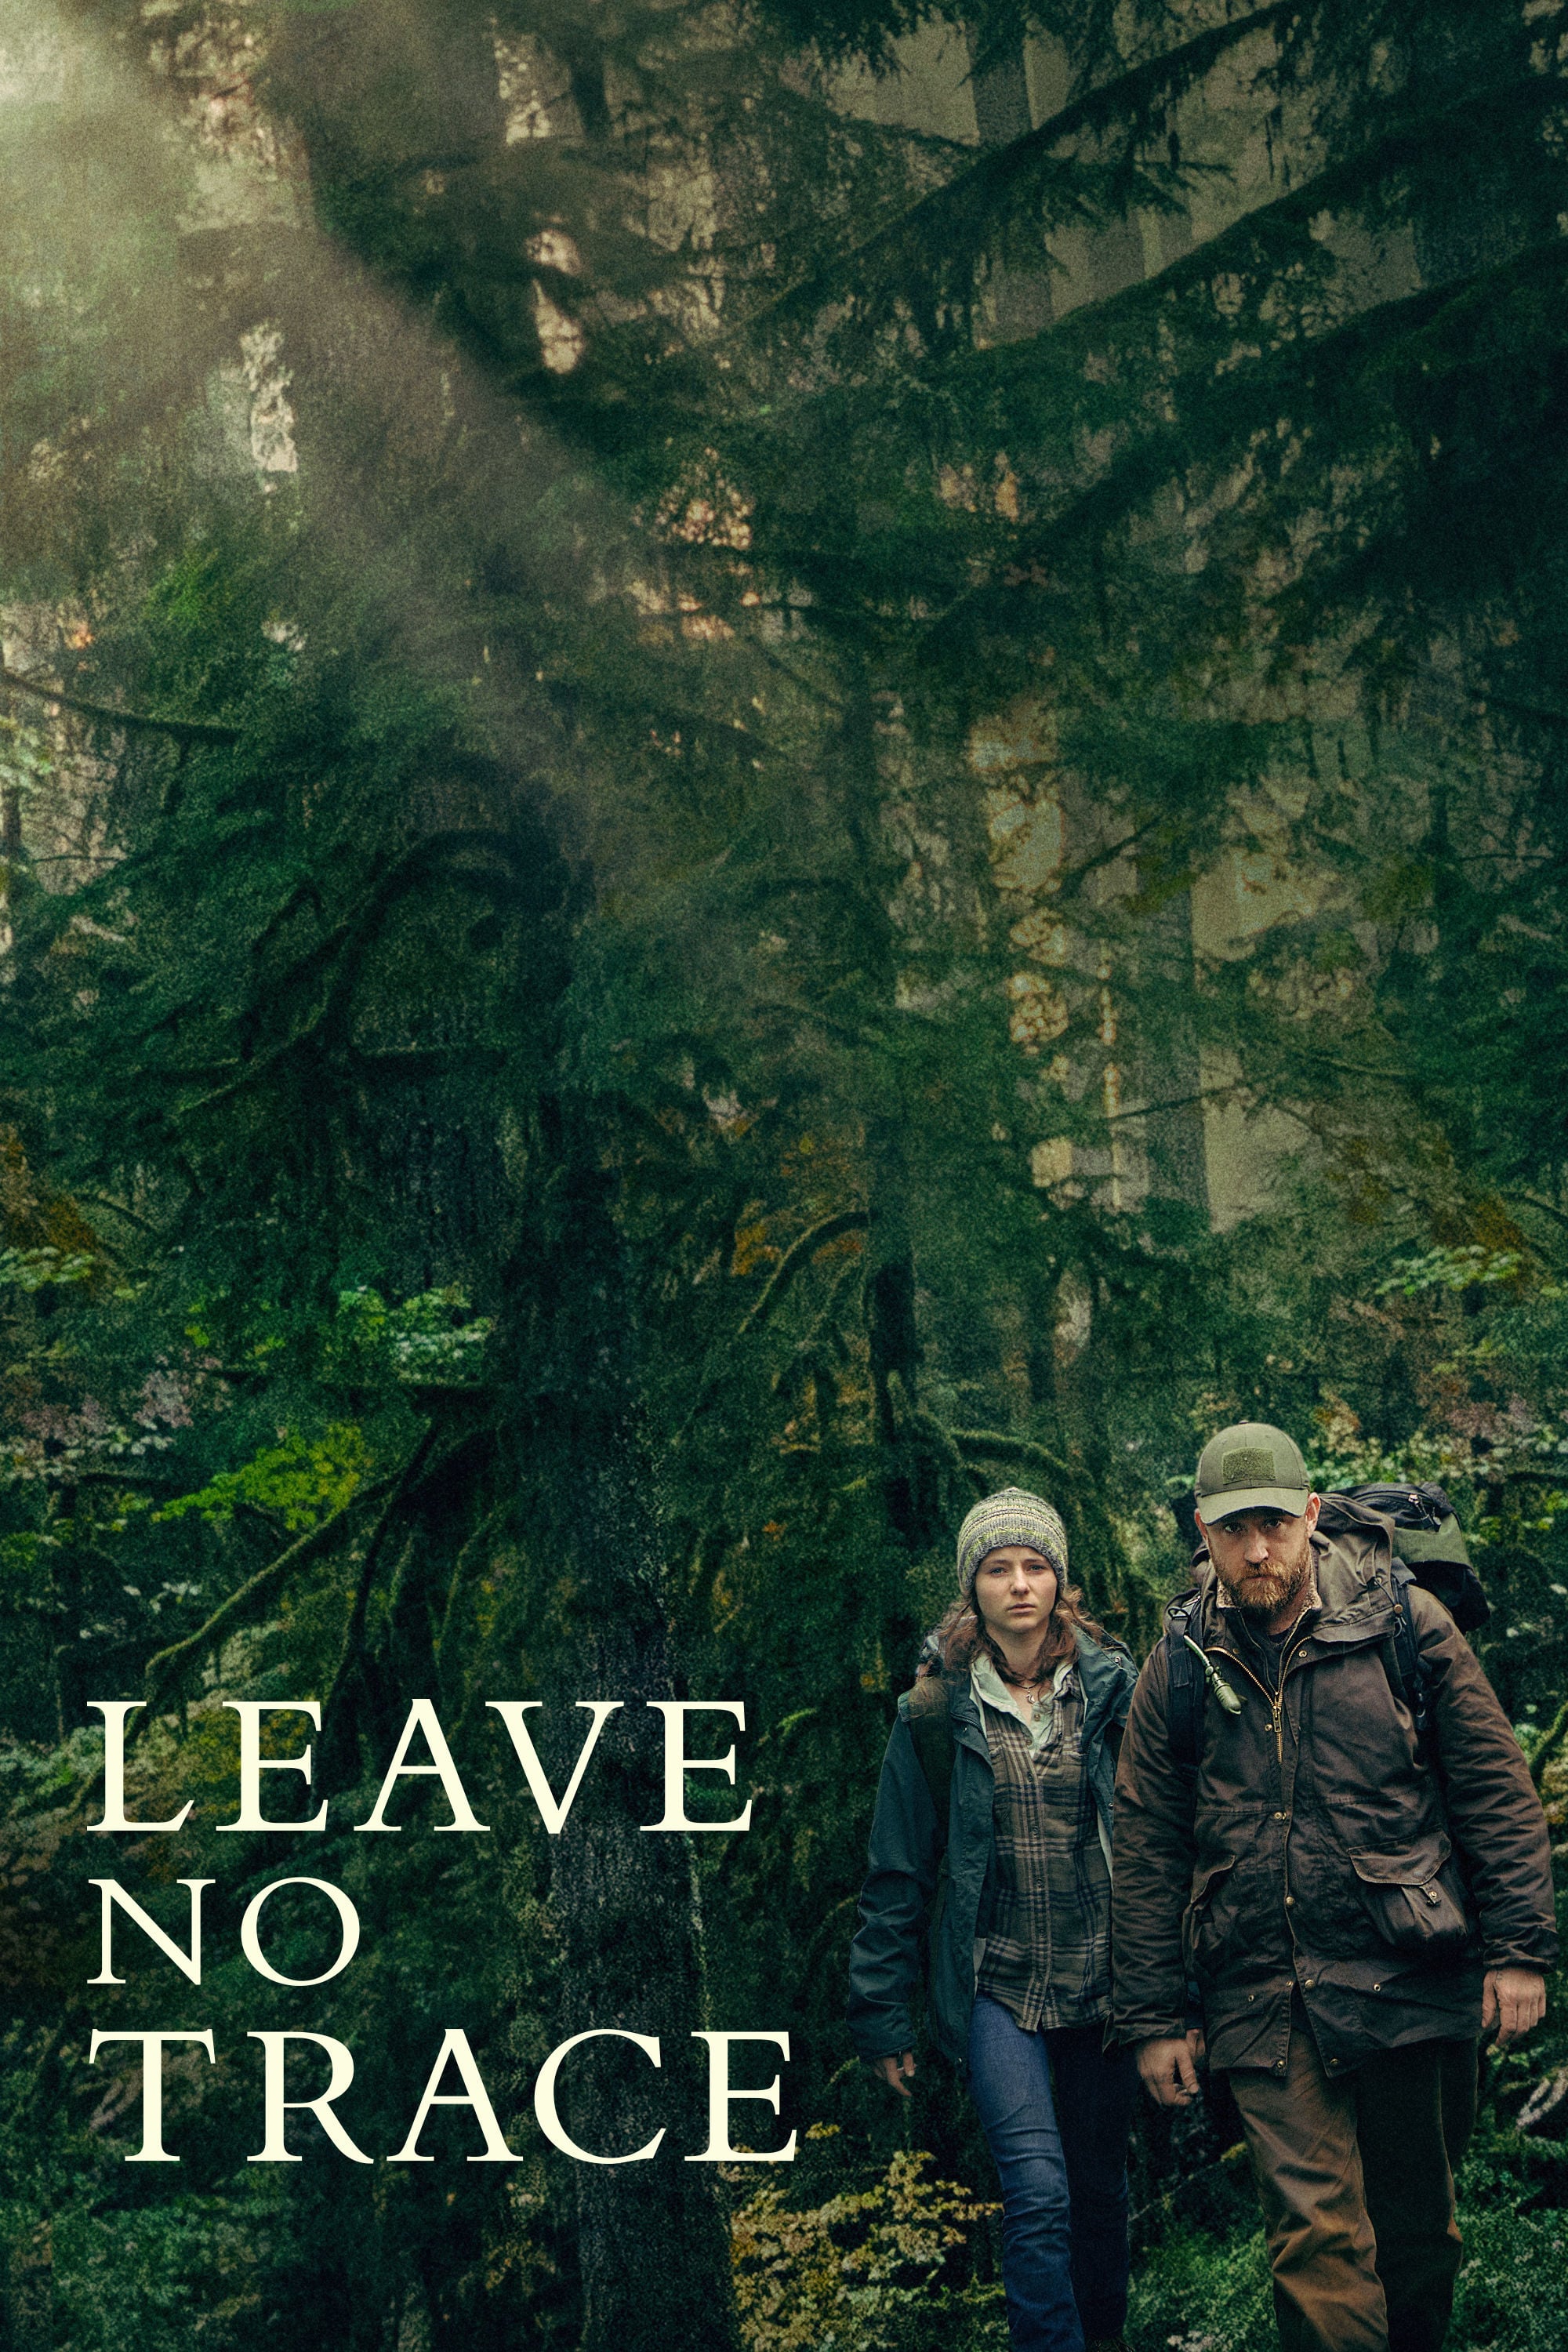 Poster for the movie "Leave No Trace"